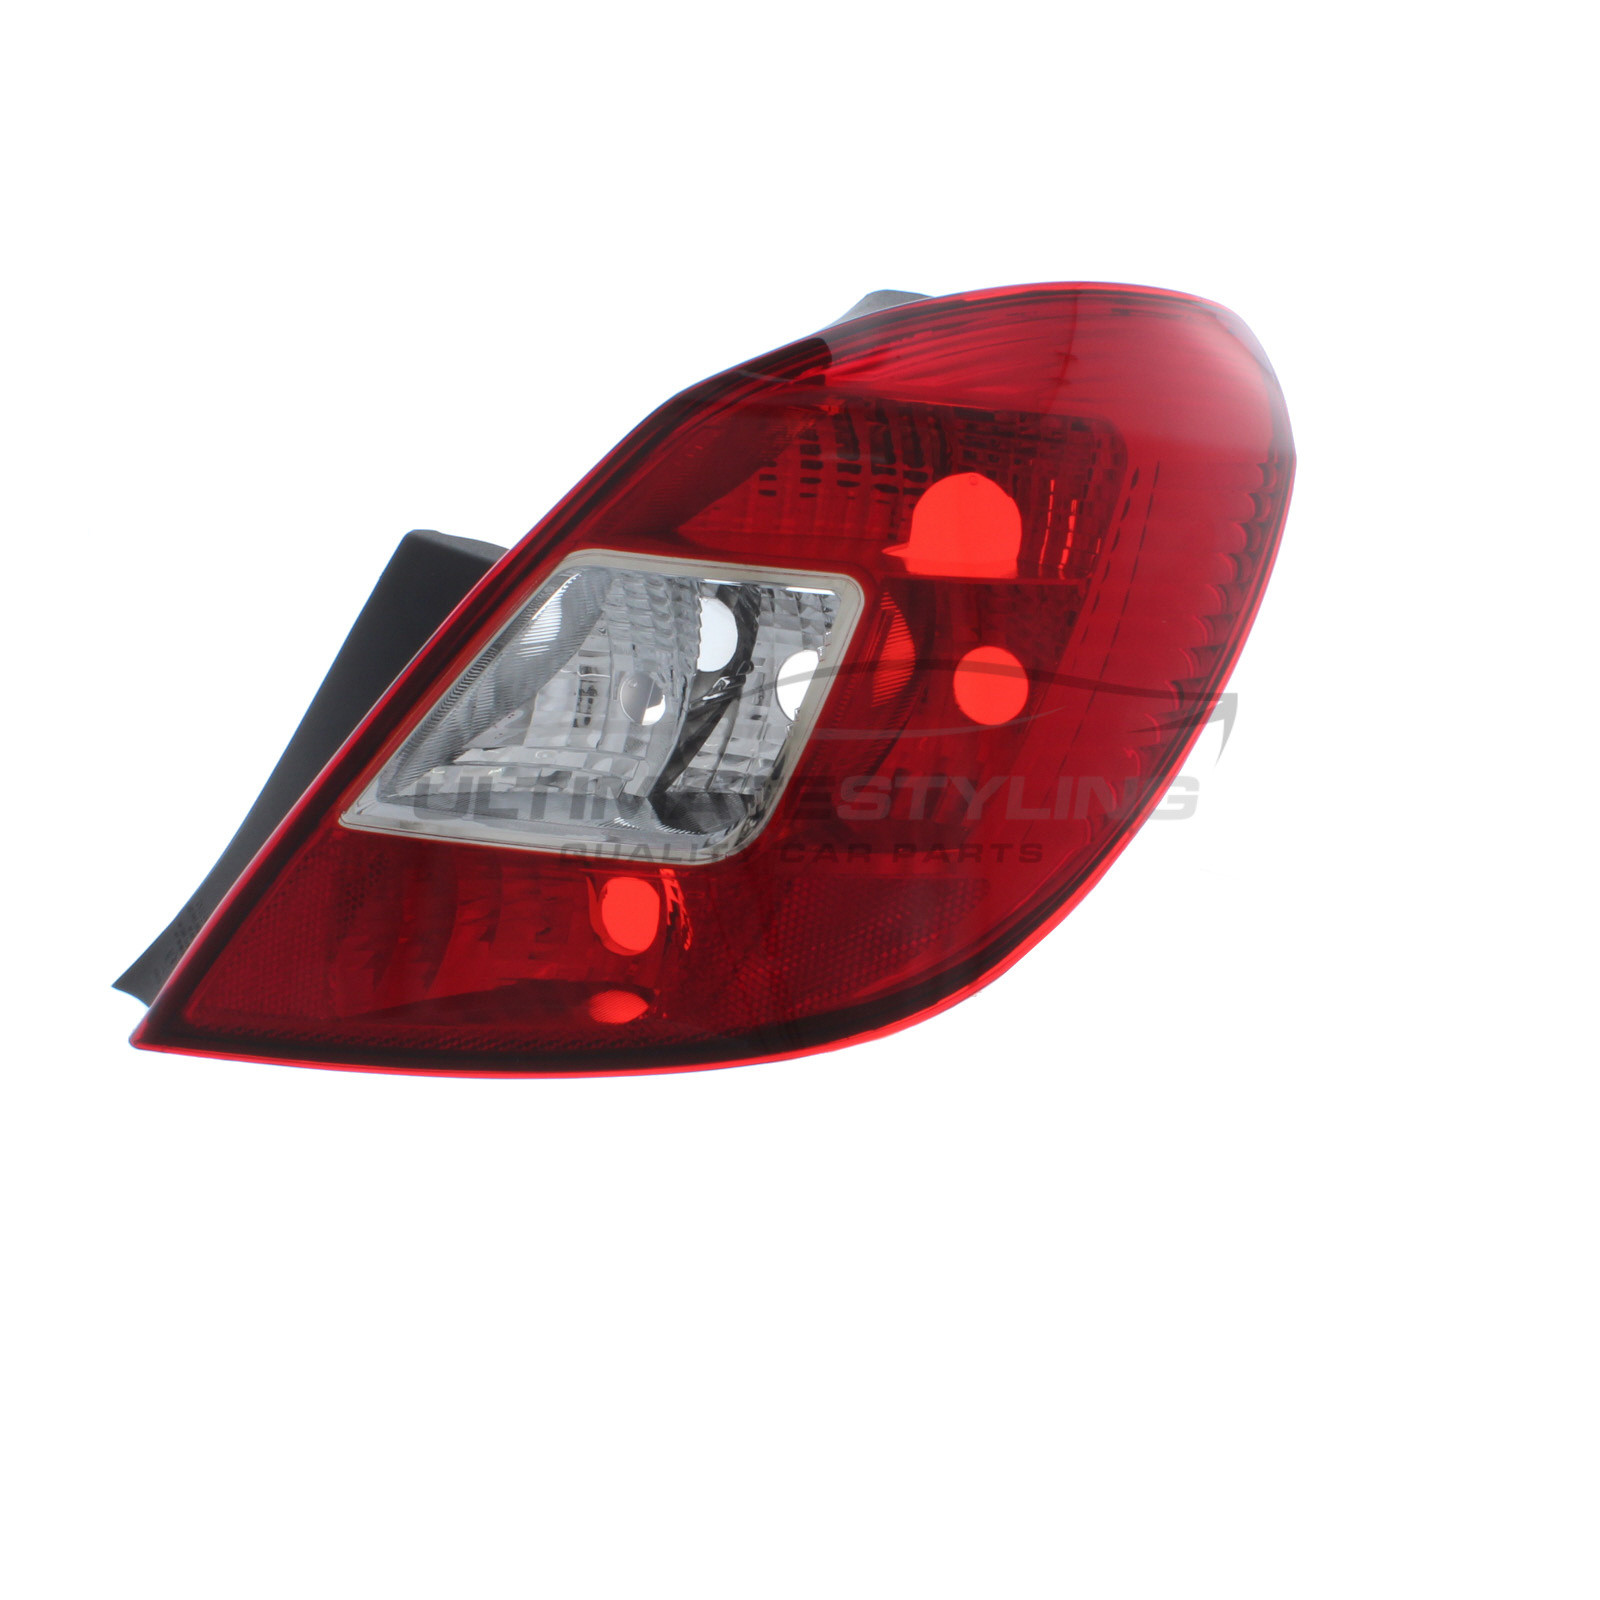 Vauxhall Corsa 2006-2015 Non-LED Red Lens With Clear Indicator Rear Light / Tail Light Excluding Bulb Holder Drivers Side (RH)